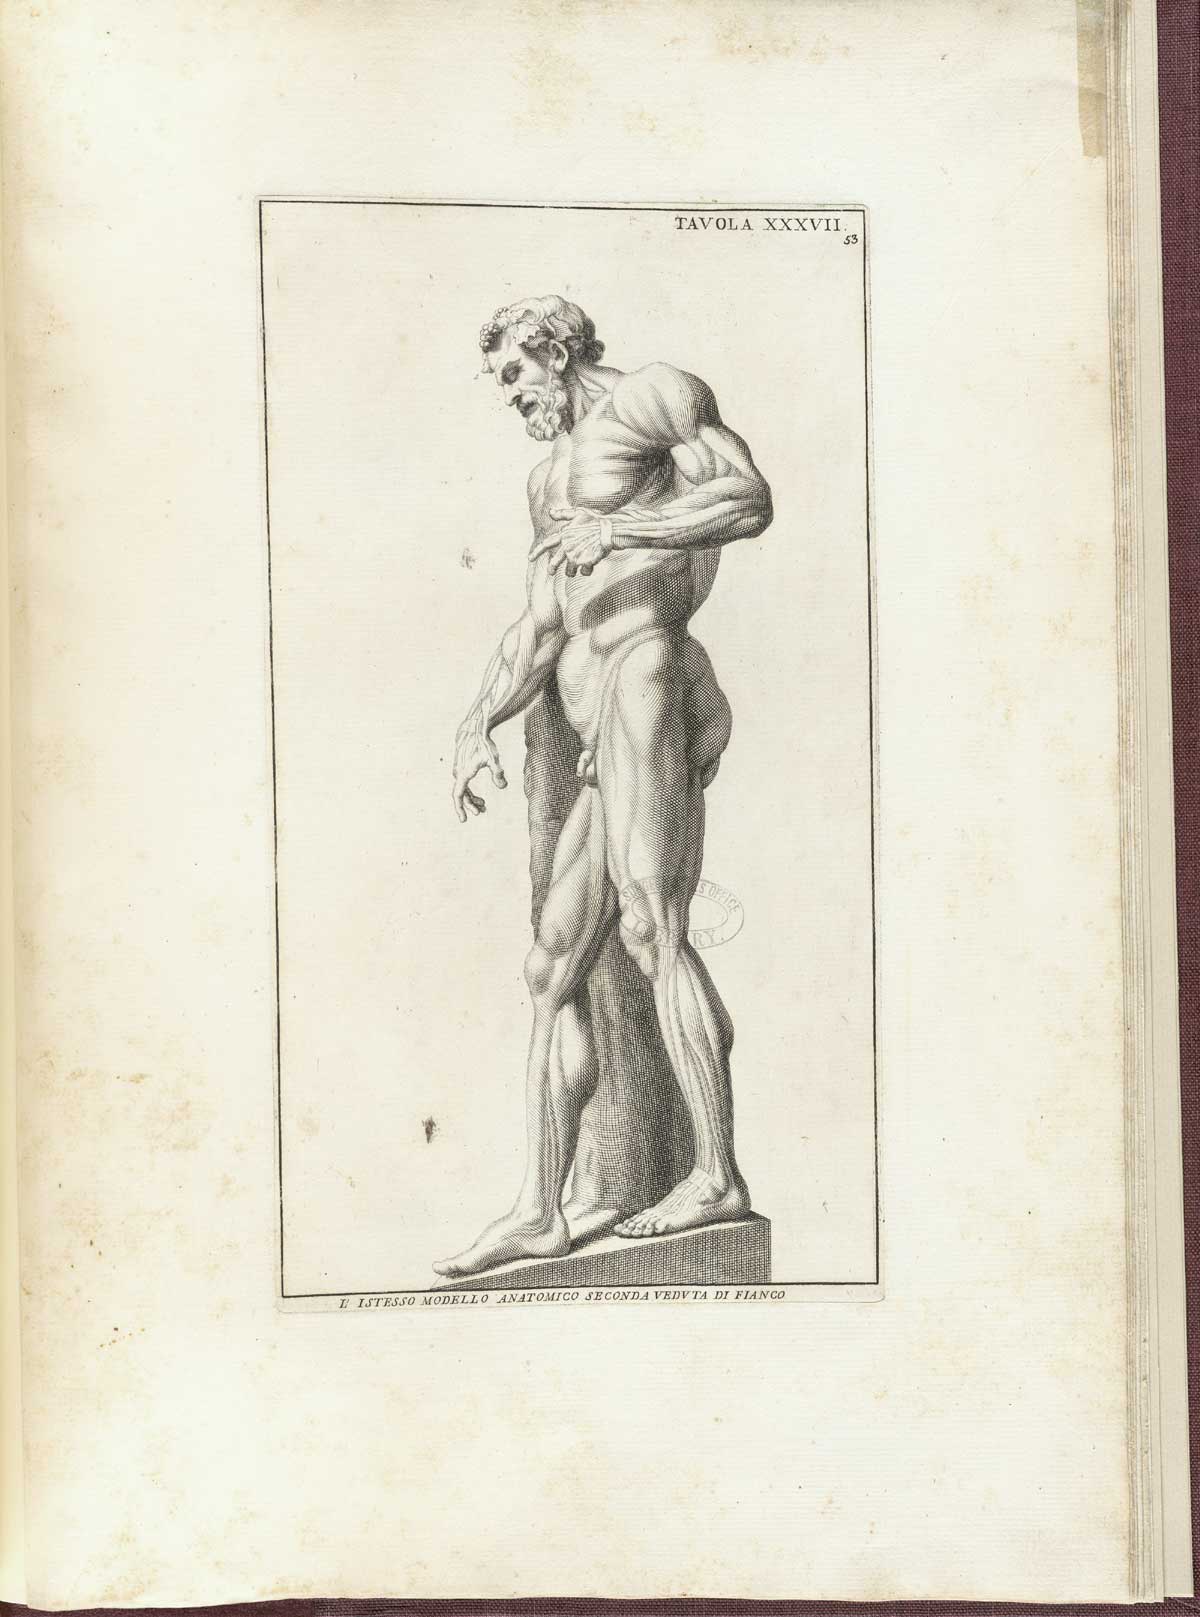 Engraving based on a statue of a faun in the Borghese collection, a standing nude male figure viewed from the right side with prominent musculature with left had behind his back and leaning with his right arm on a post or tree; from Bernardino Genga’s Anatomia per uso et intelligenza del disegno, NLM Call no.: WZ 250 G329an 1691.